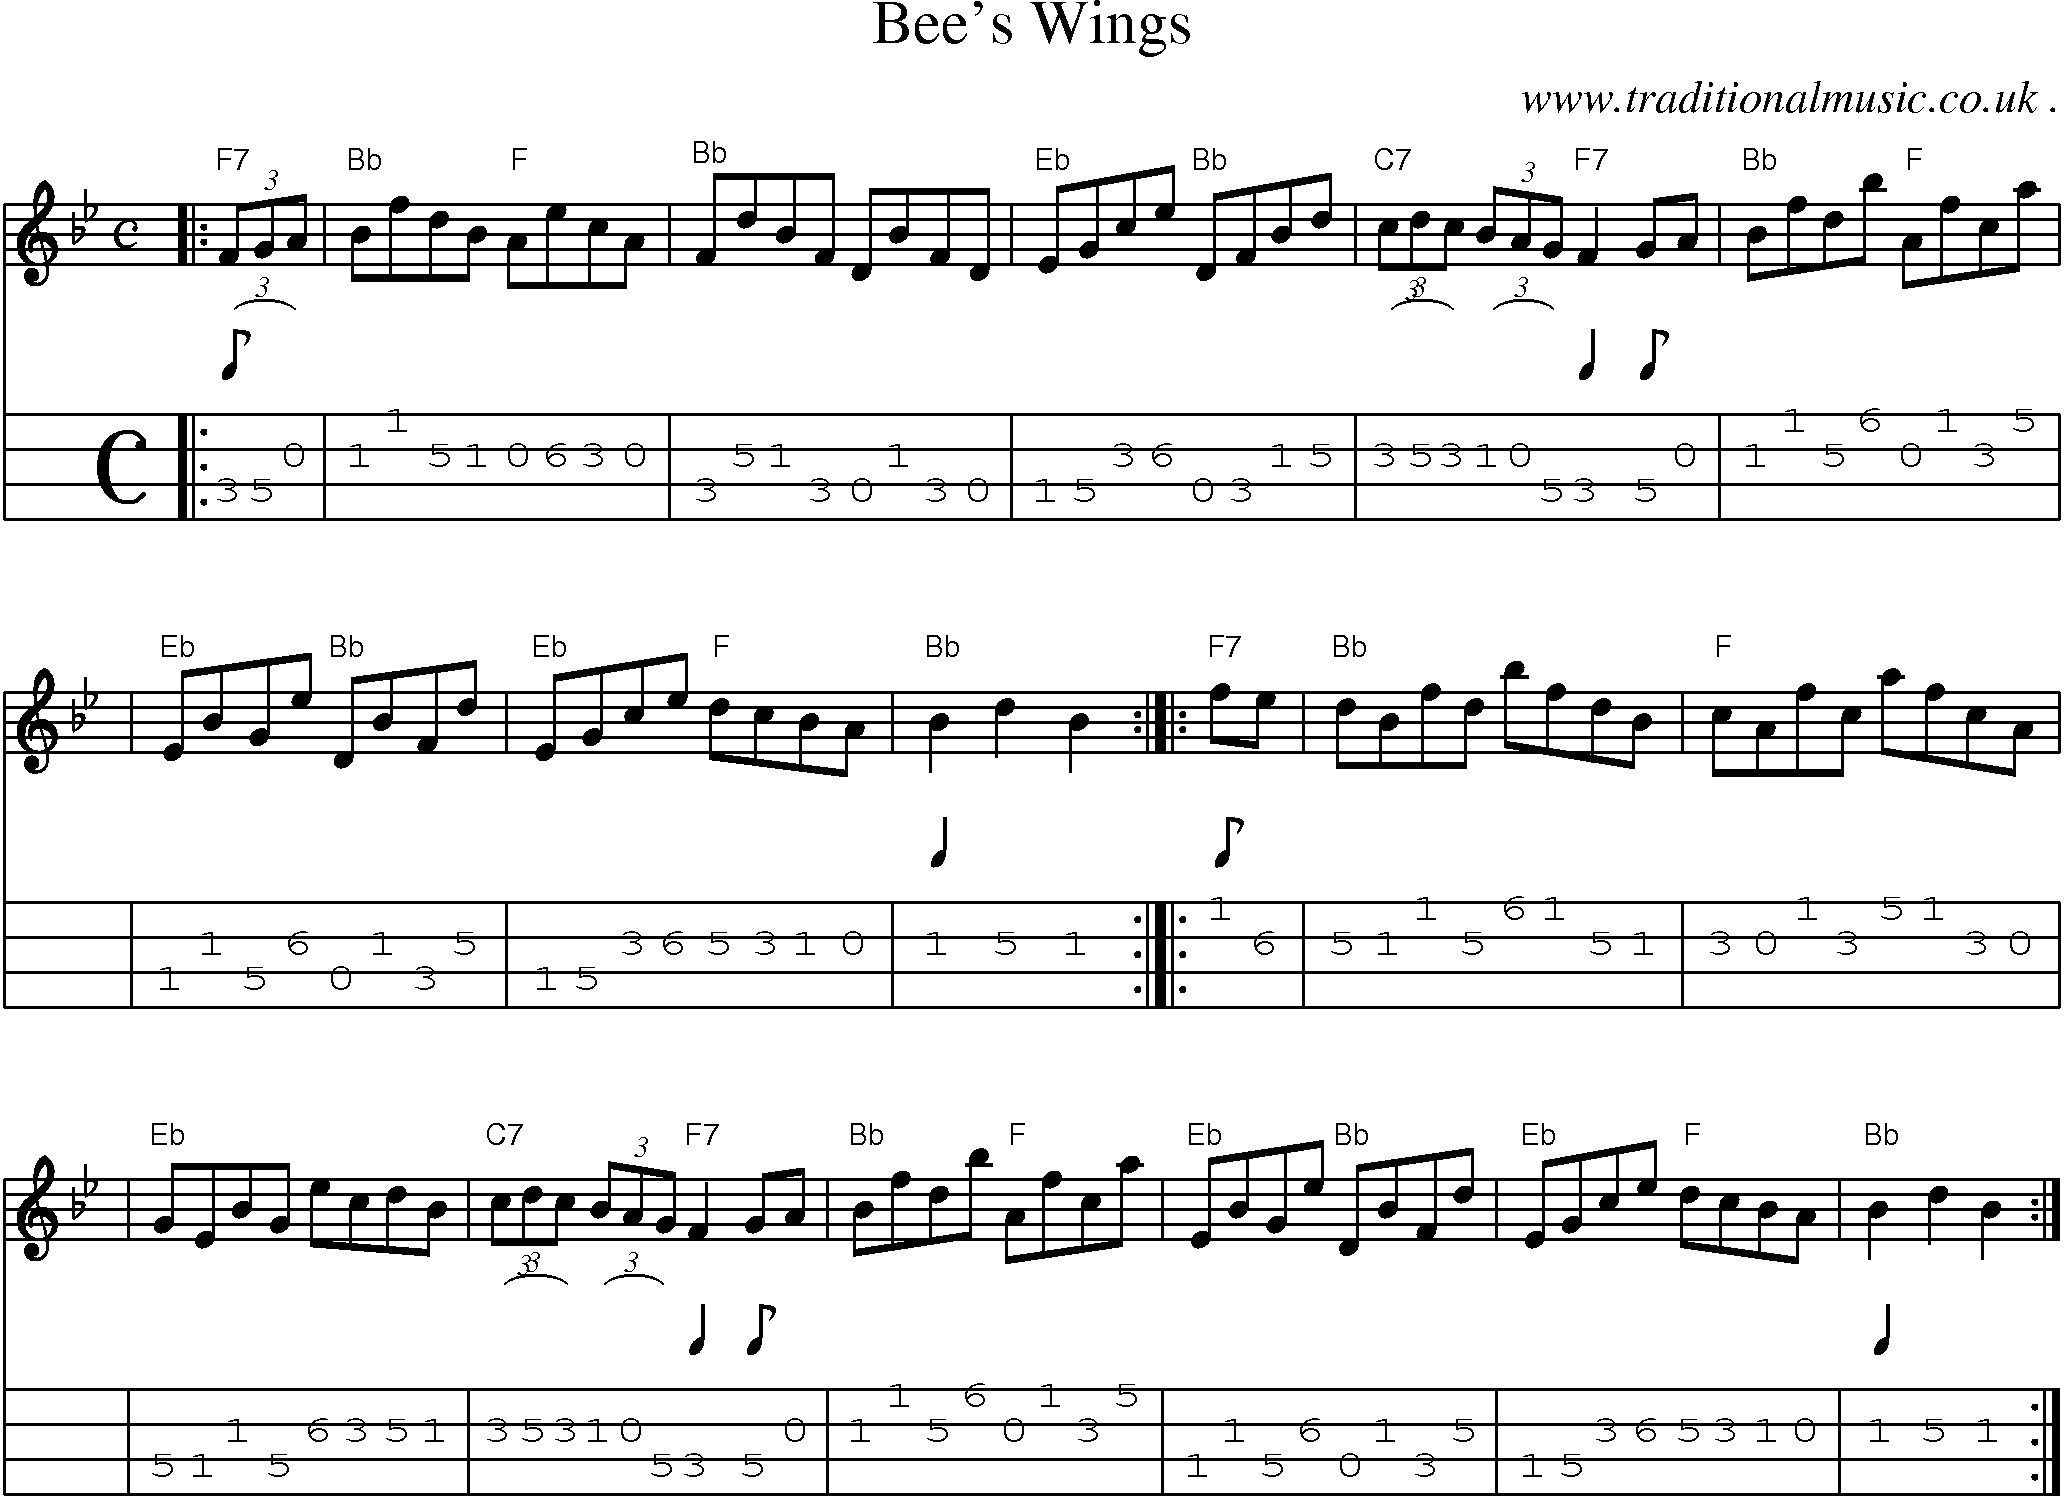 Sheet-music  score, Chords and Mandolin Tabs for Bees Wings